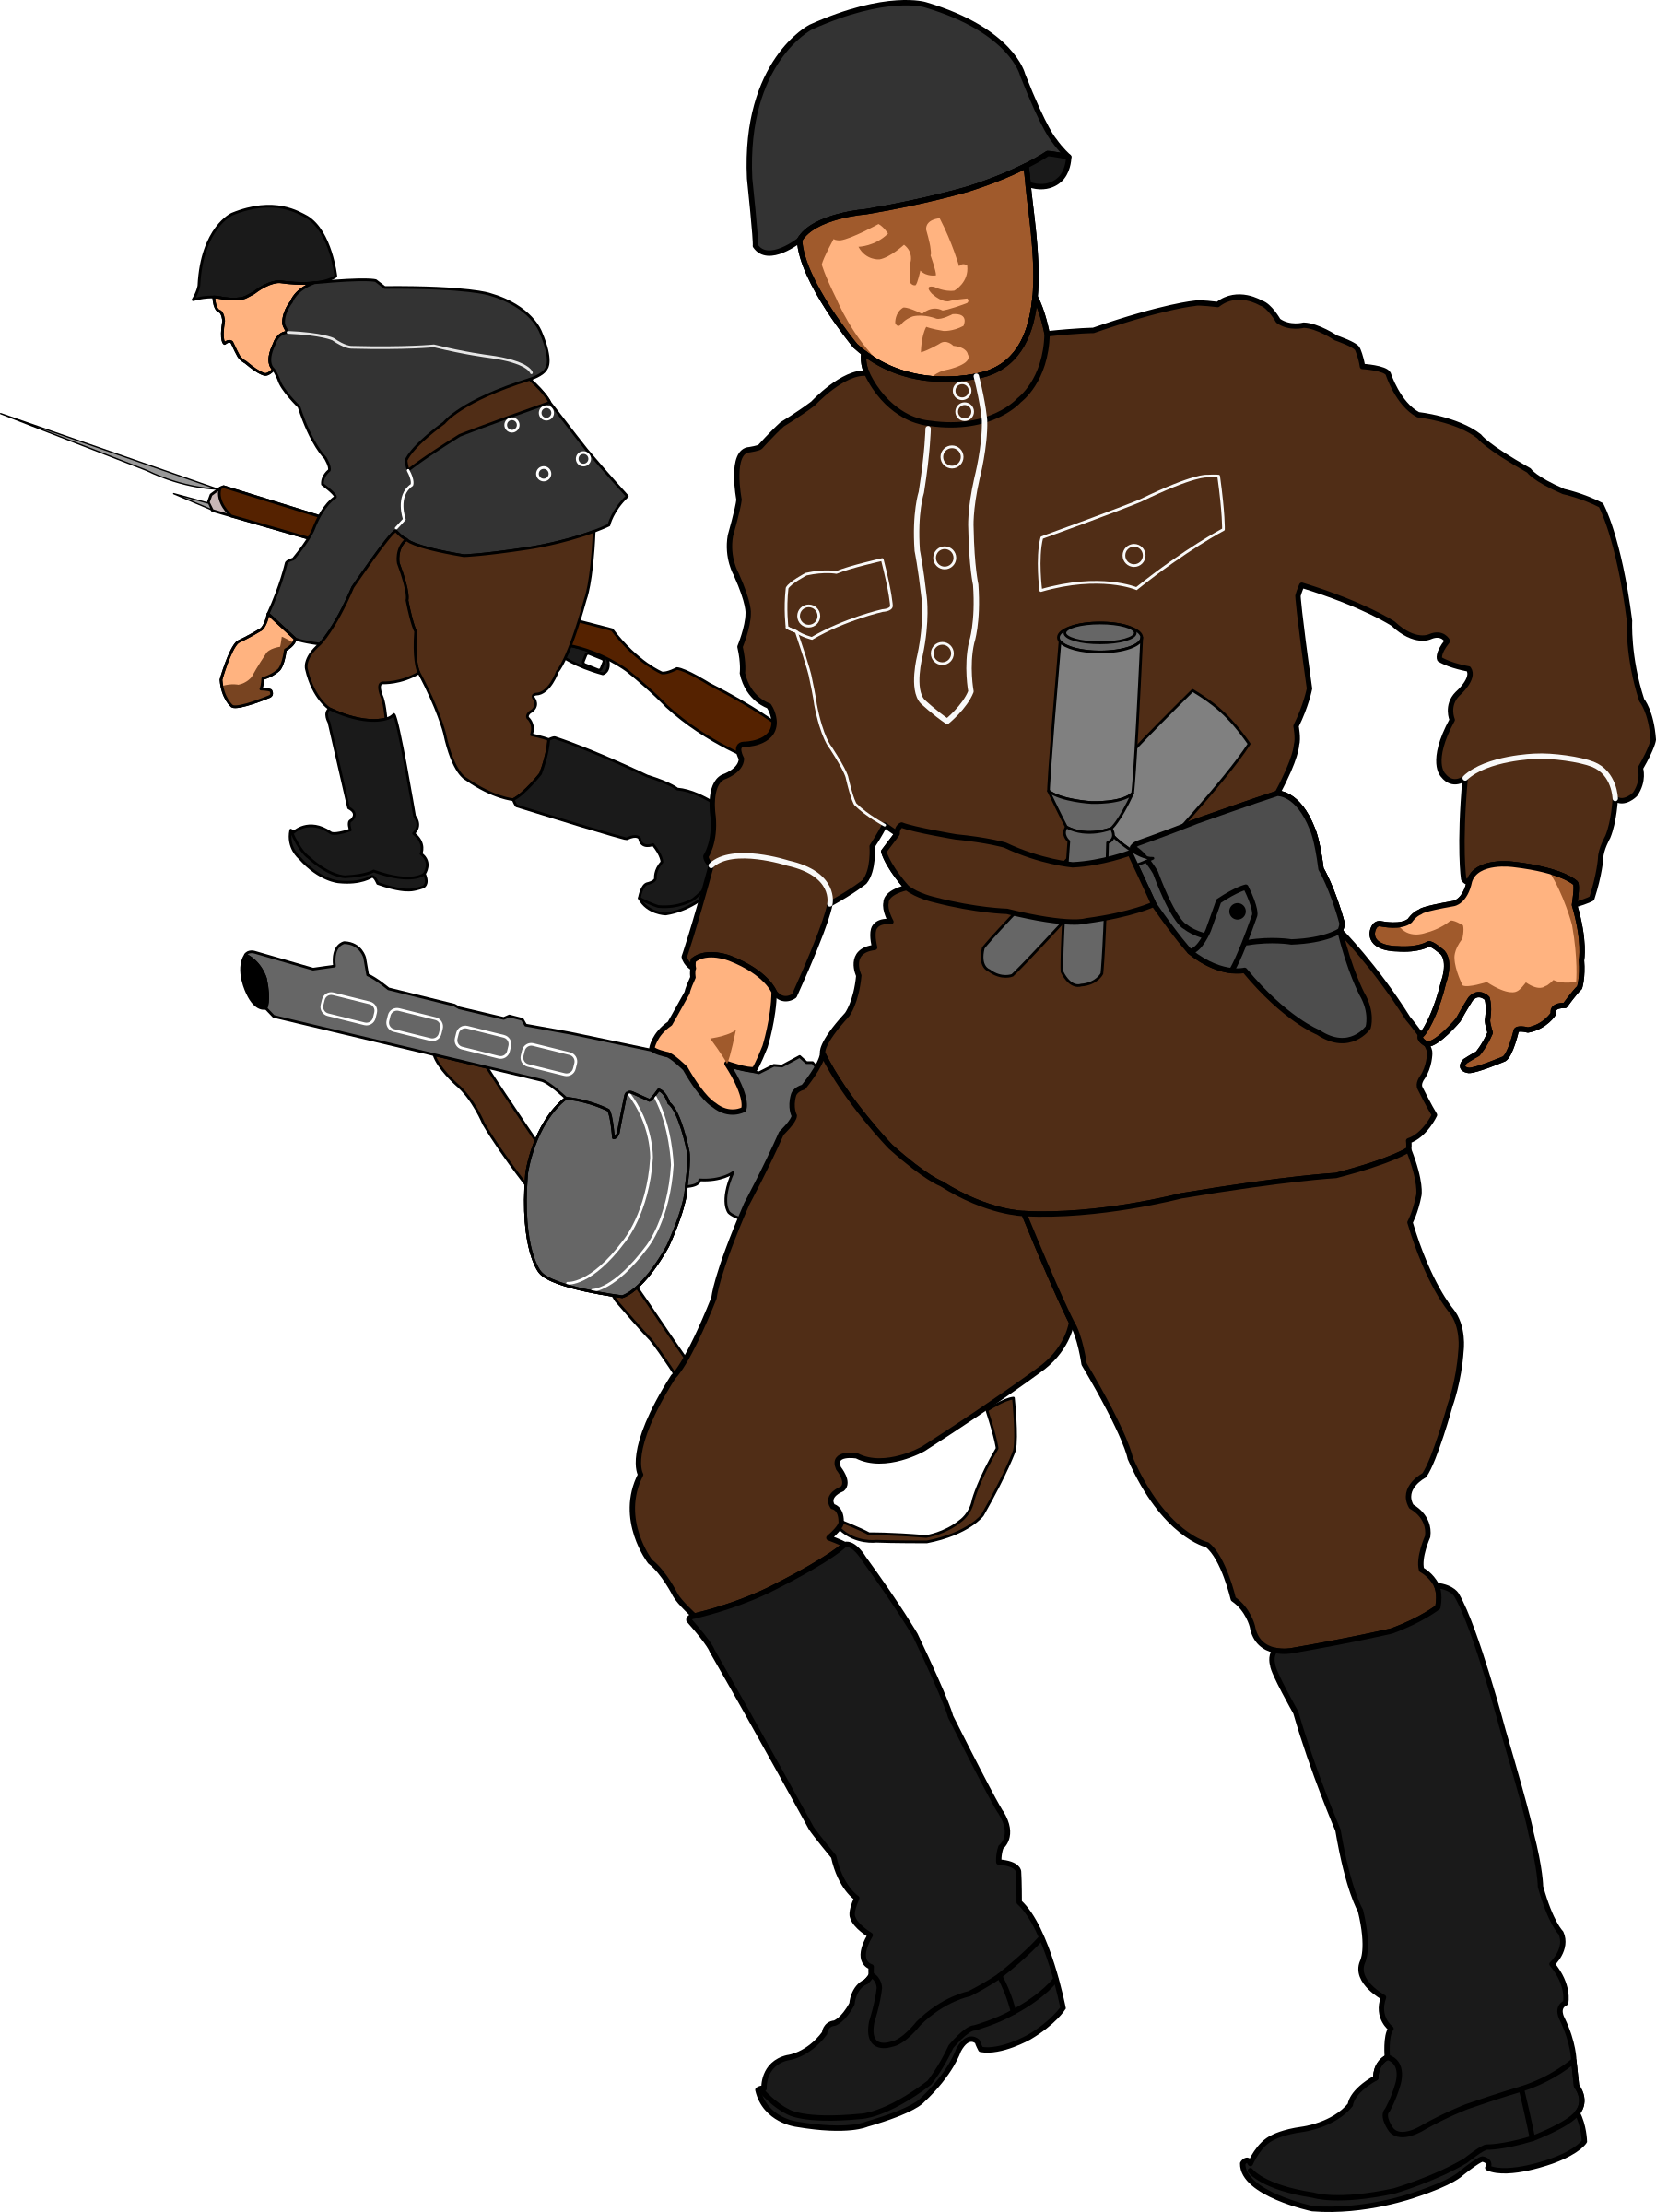 Soldiers big image png. Submarine clipart soviet